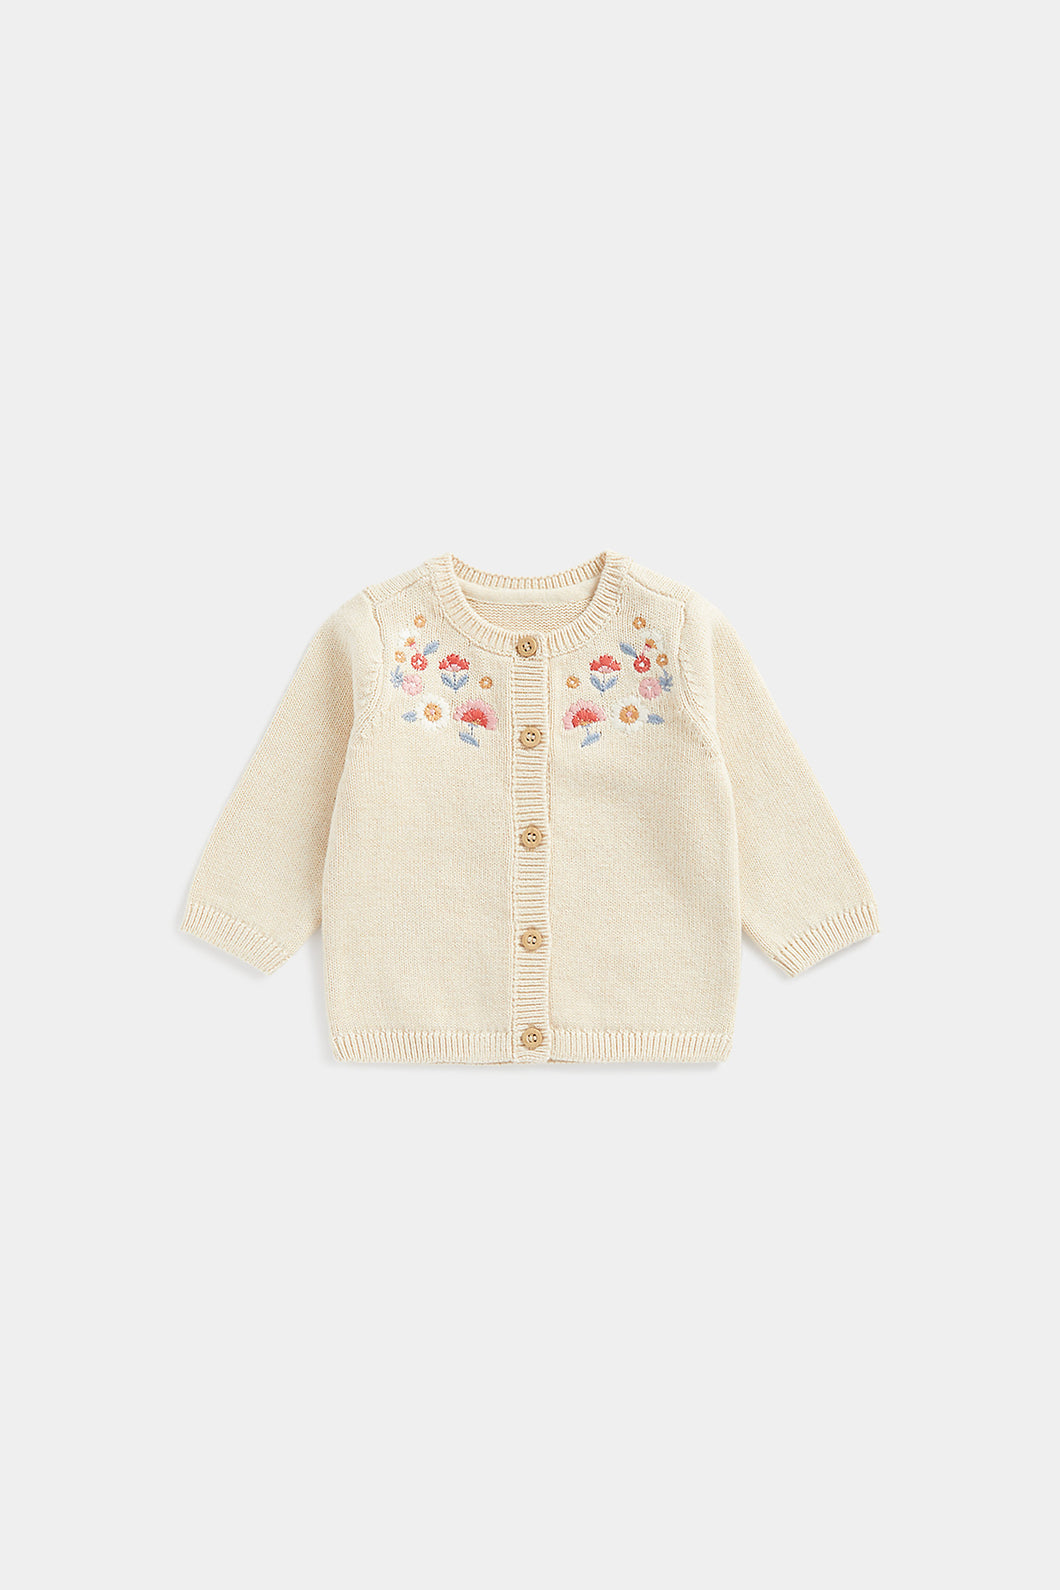 Mothercare Floral Knitted Cardigan